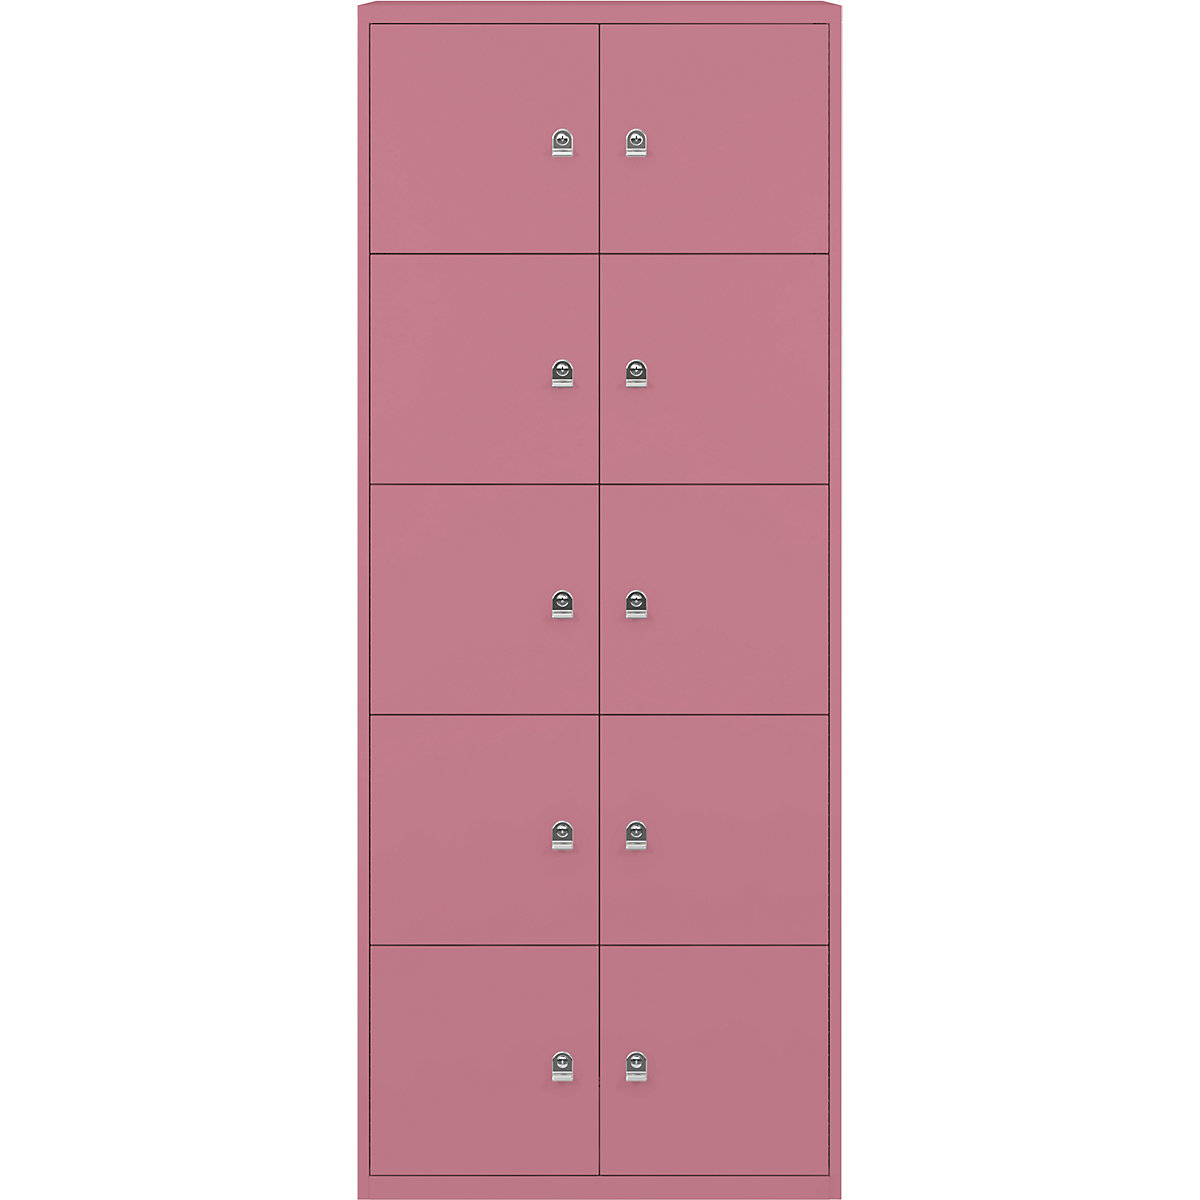 BISLEY – LateralFile™ lodge, with 10 lockable compartments, height 375 mm each, pink